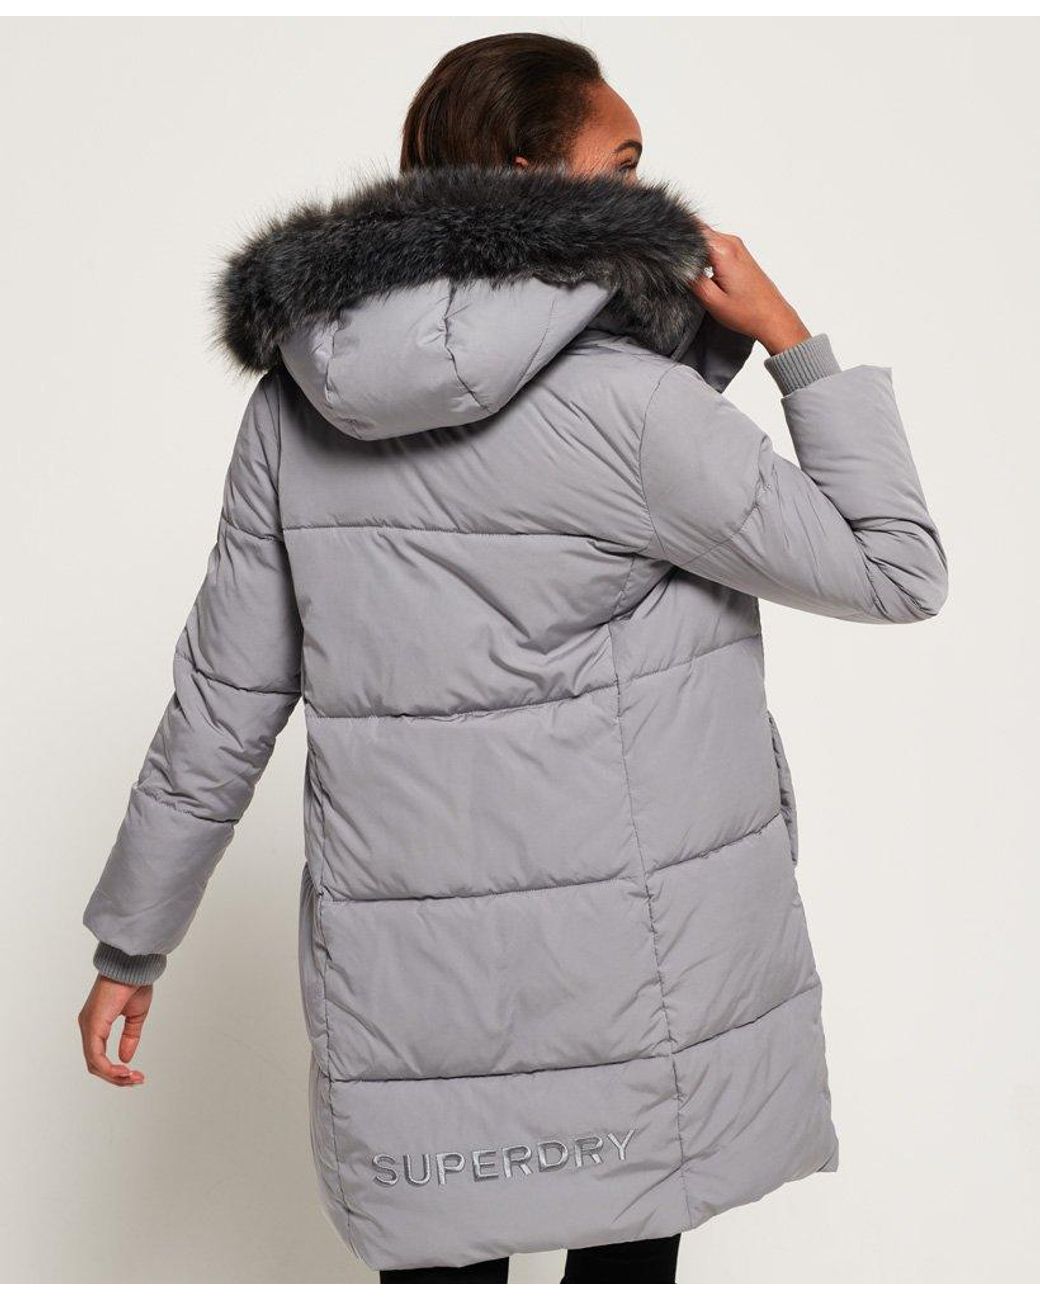 Superdry Cocoon Parka Jacket Grey in Gray | Lyst